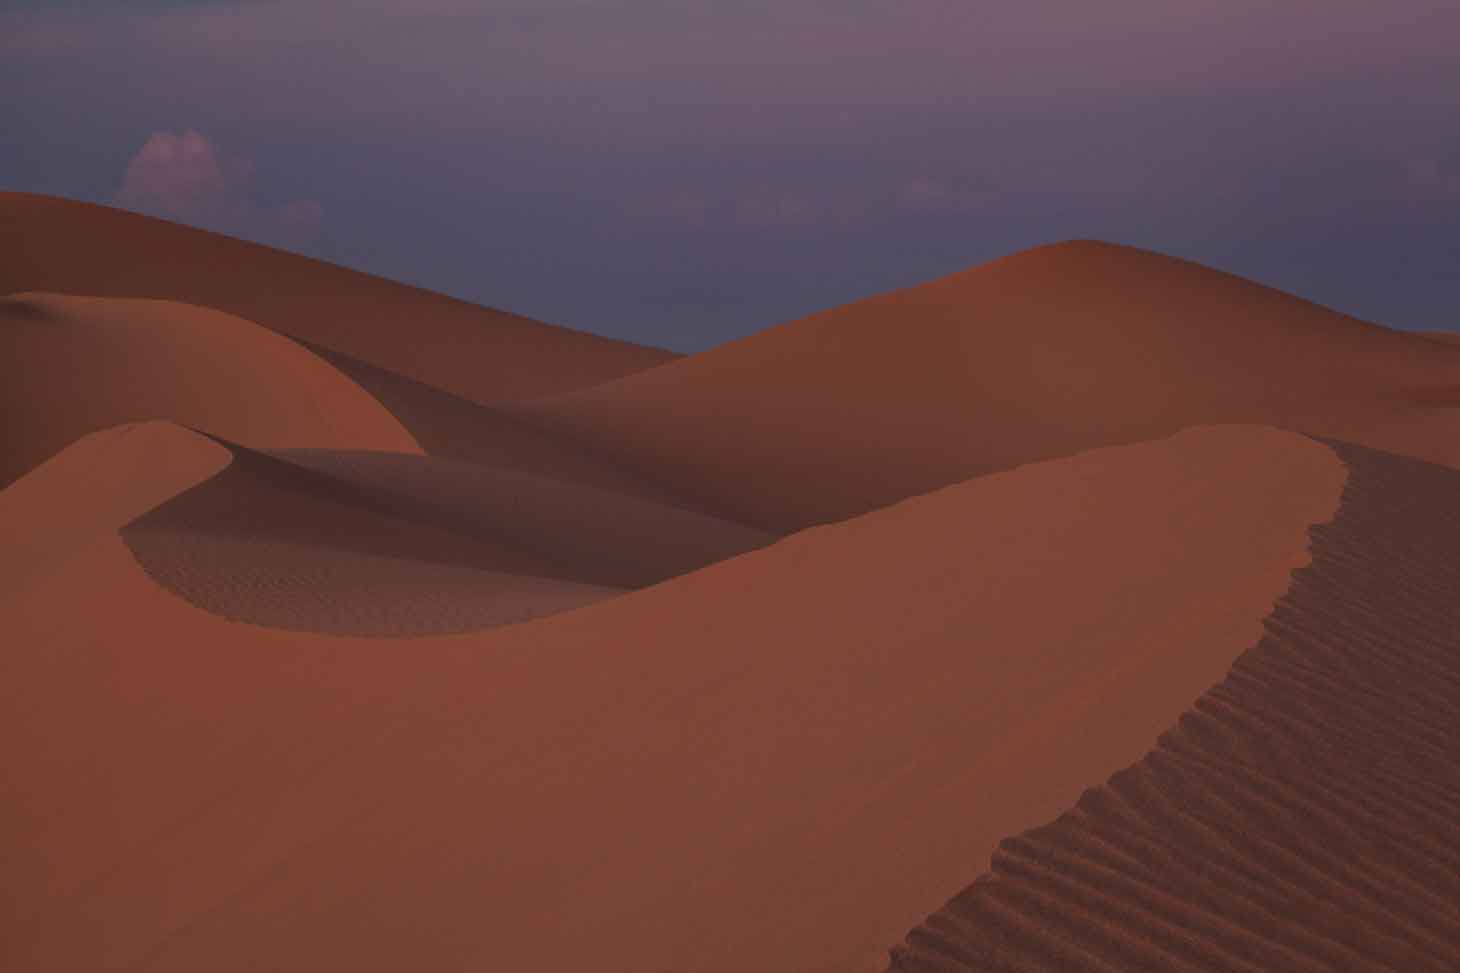 Imperial Sand Dunes (a.k.a., Glamis Dunes or Algodones Dunes) in the southern California desert